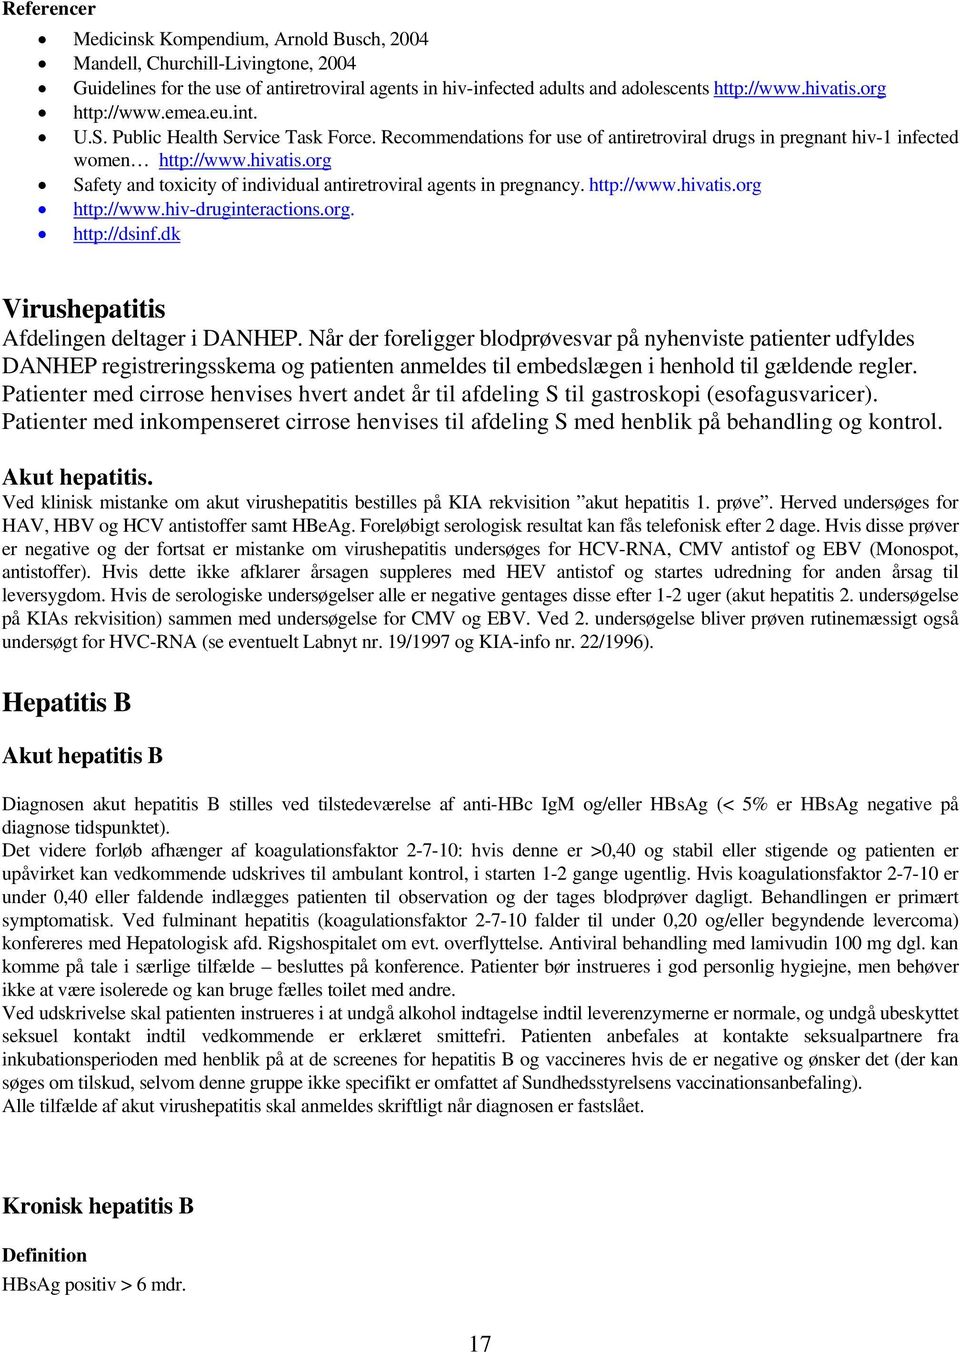 org Safety and toxicity of individual antiretroviral agents in pregnancy. http://www.hivatis.org http://www.hiv-druginteractions.org. http://dsinf.dk Virushepatitis Afdelingen deltager i DANHEP.